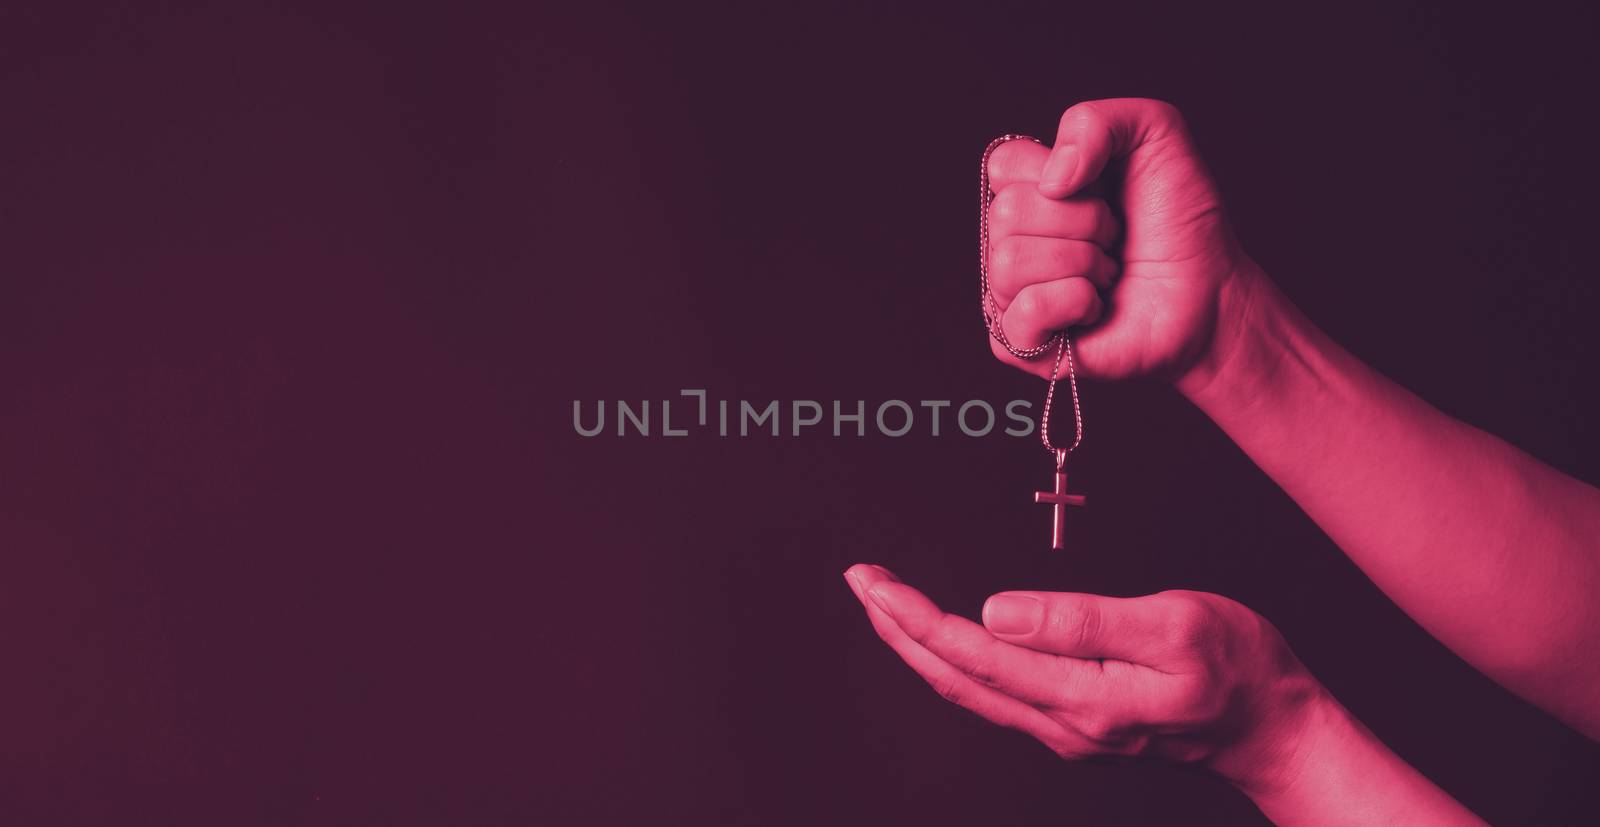 Crucifix pendant or cross sign made from silver and hold in man hand. represent praying for someone that pass away from World pandemic coronavirus and close-up shot black background 